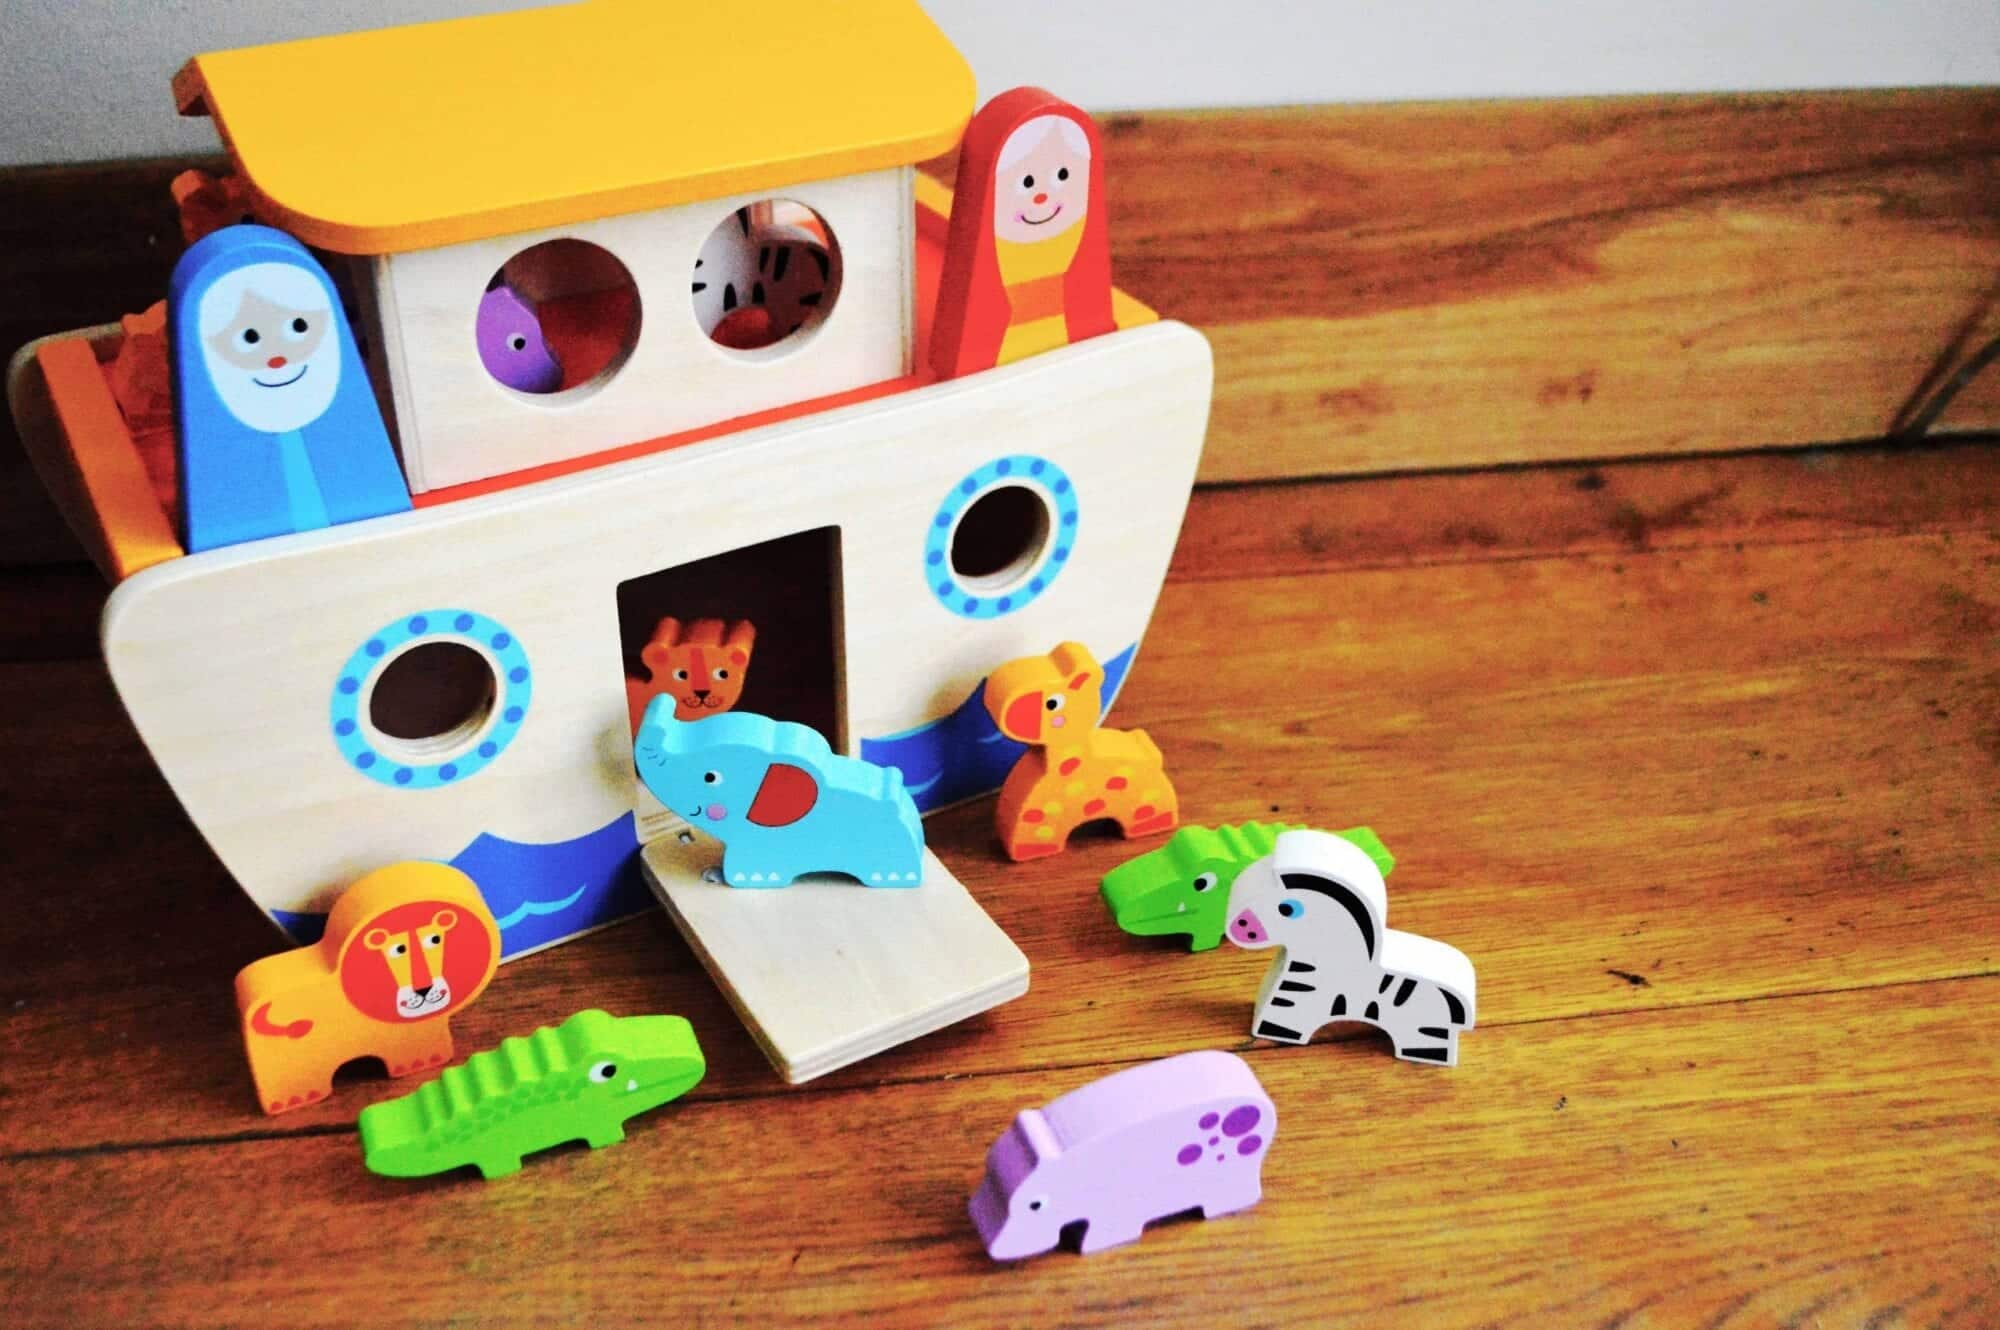 Benefits of Wooden Toys